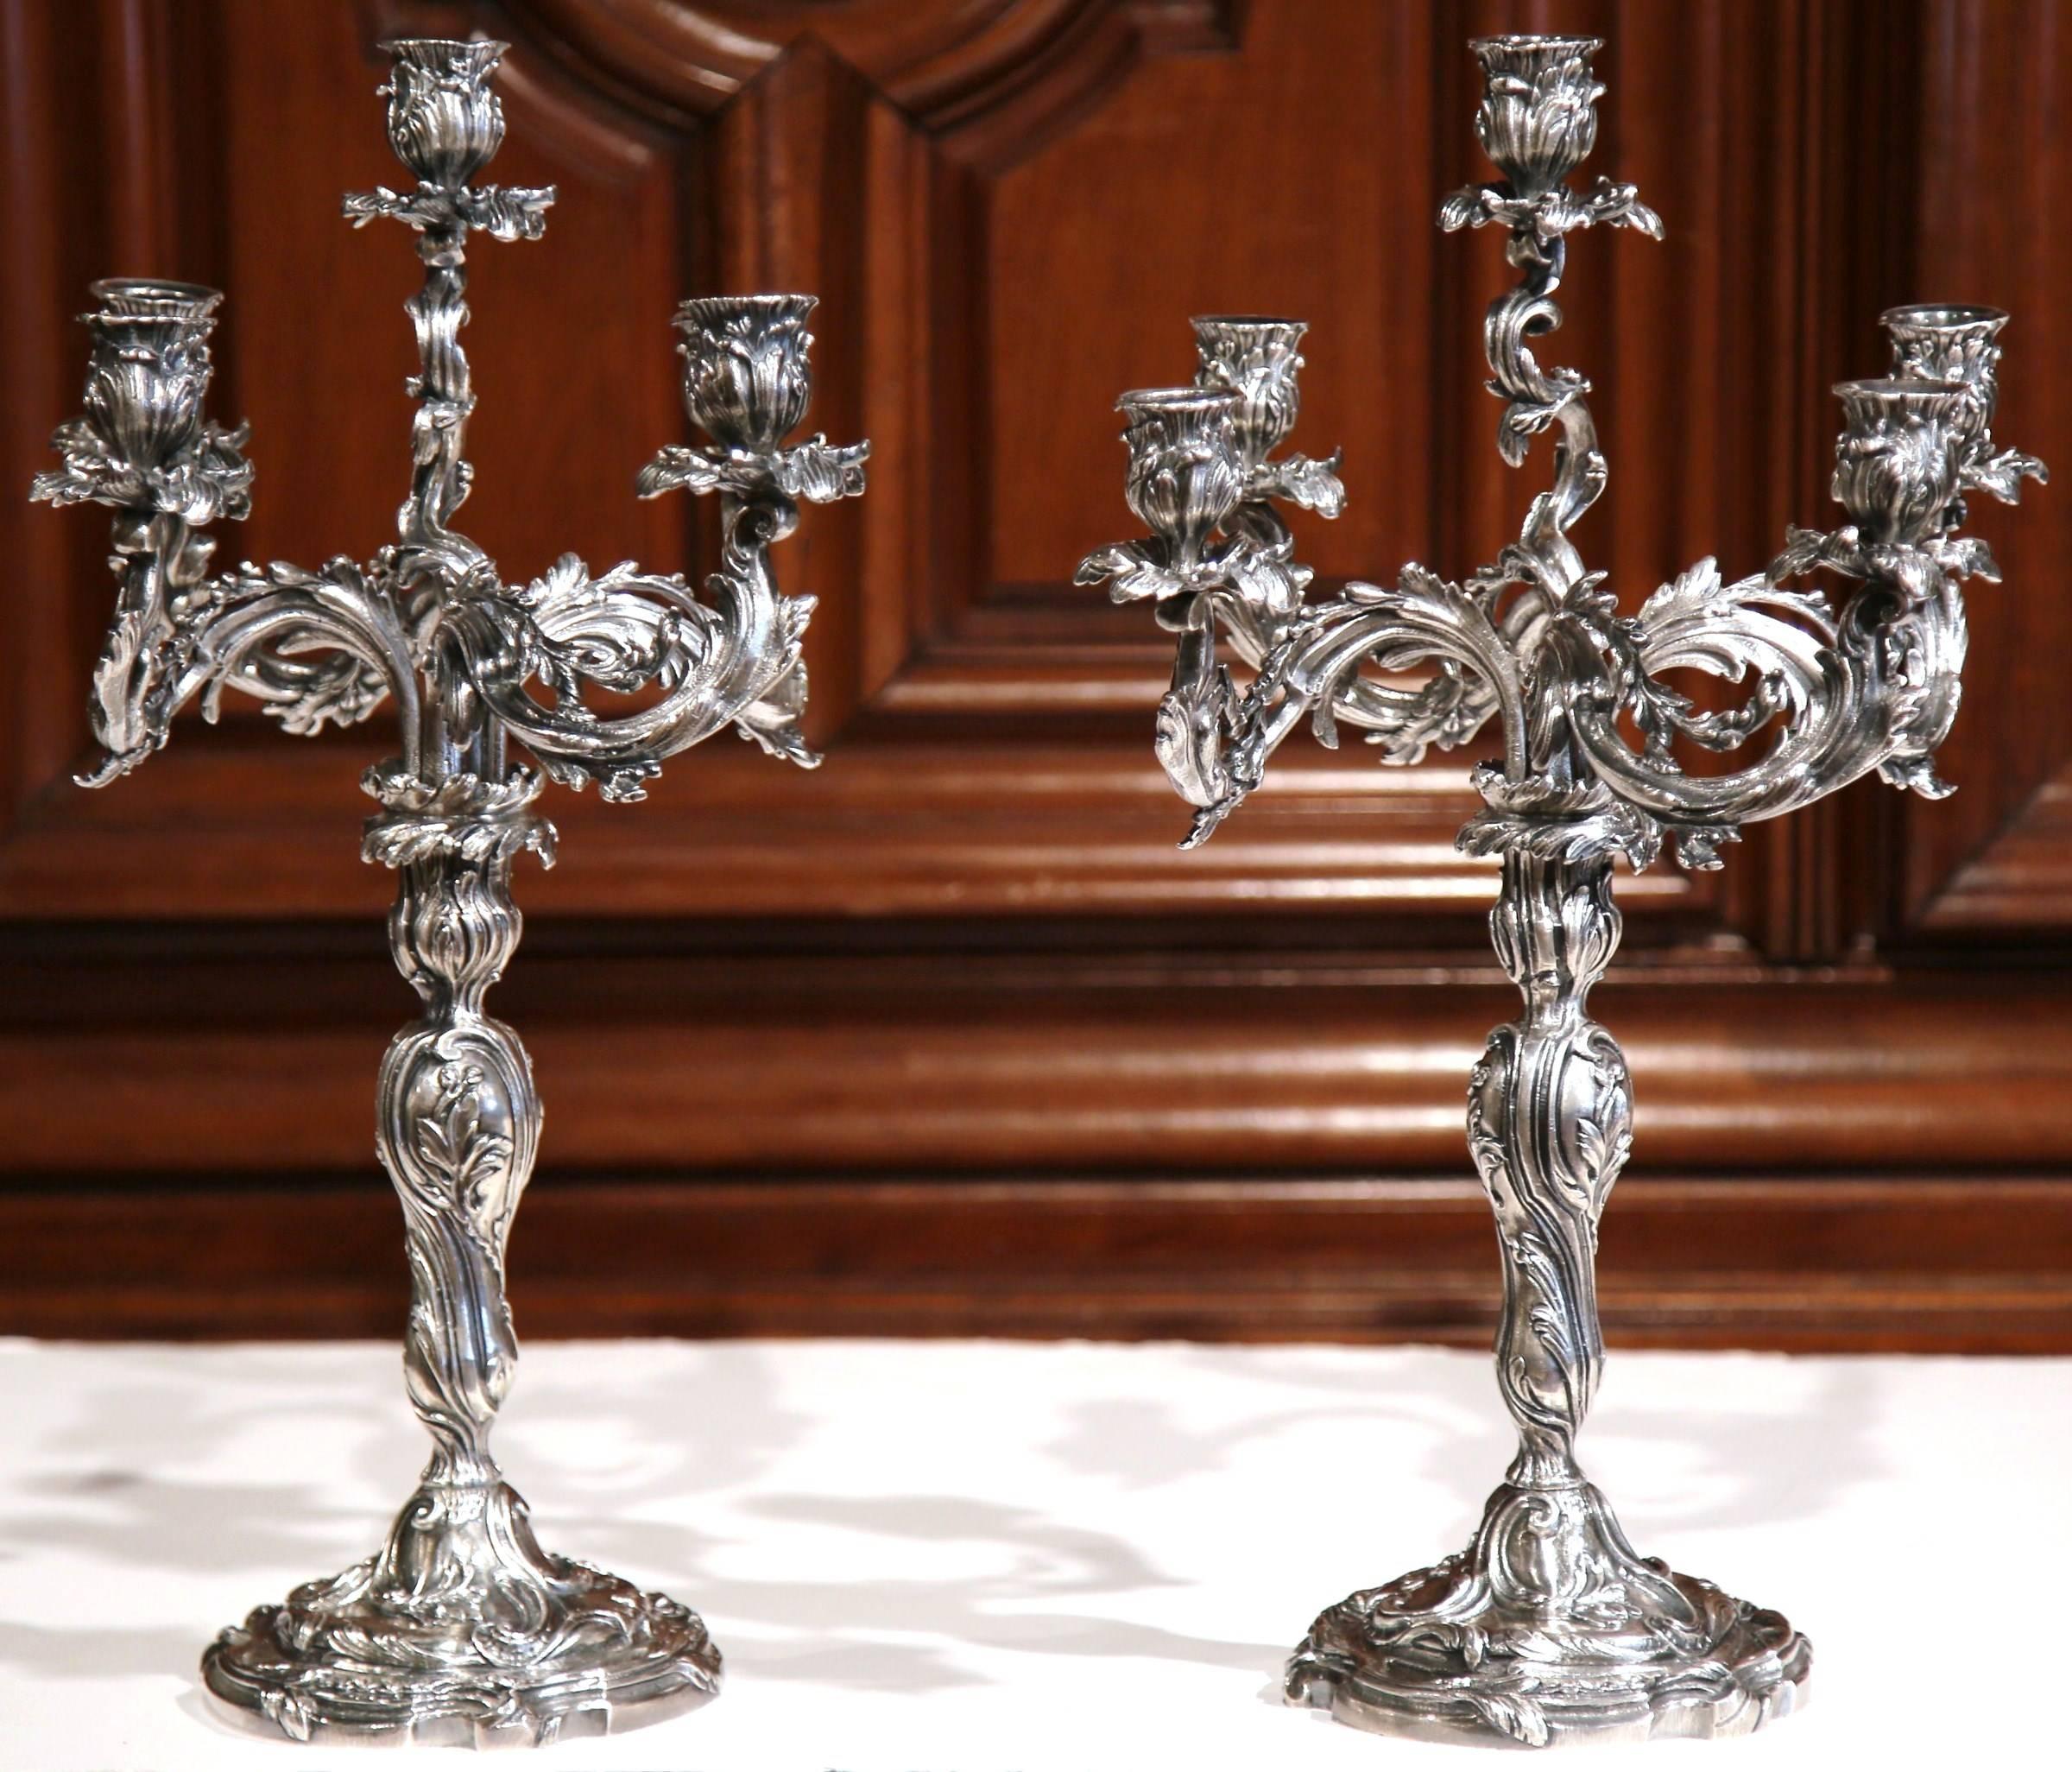 Pair of 19th Century French Louis XV Bronze Silvered Five-Arm Candelabras 1